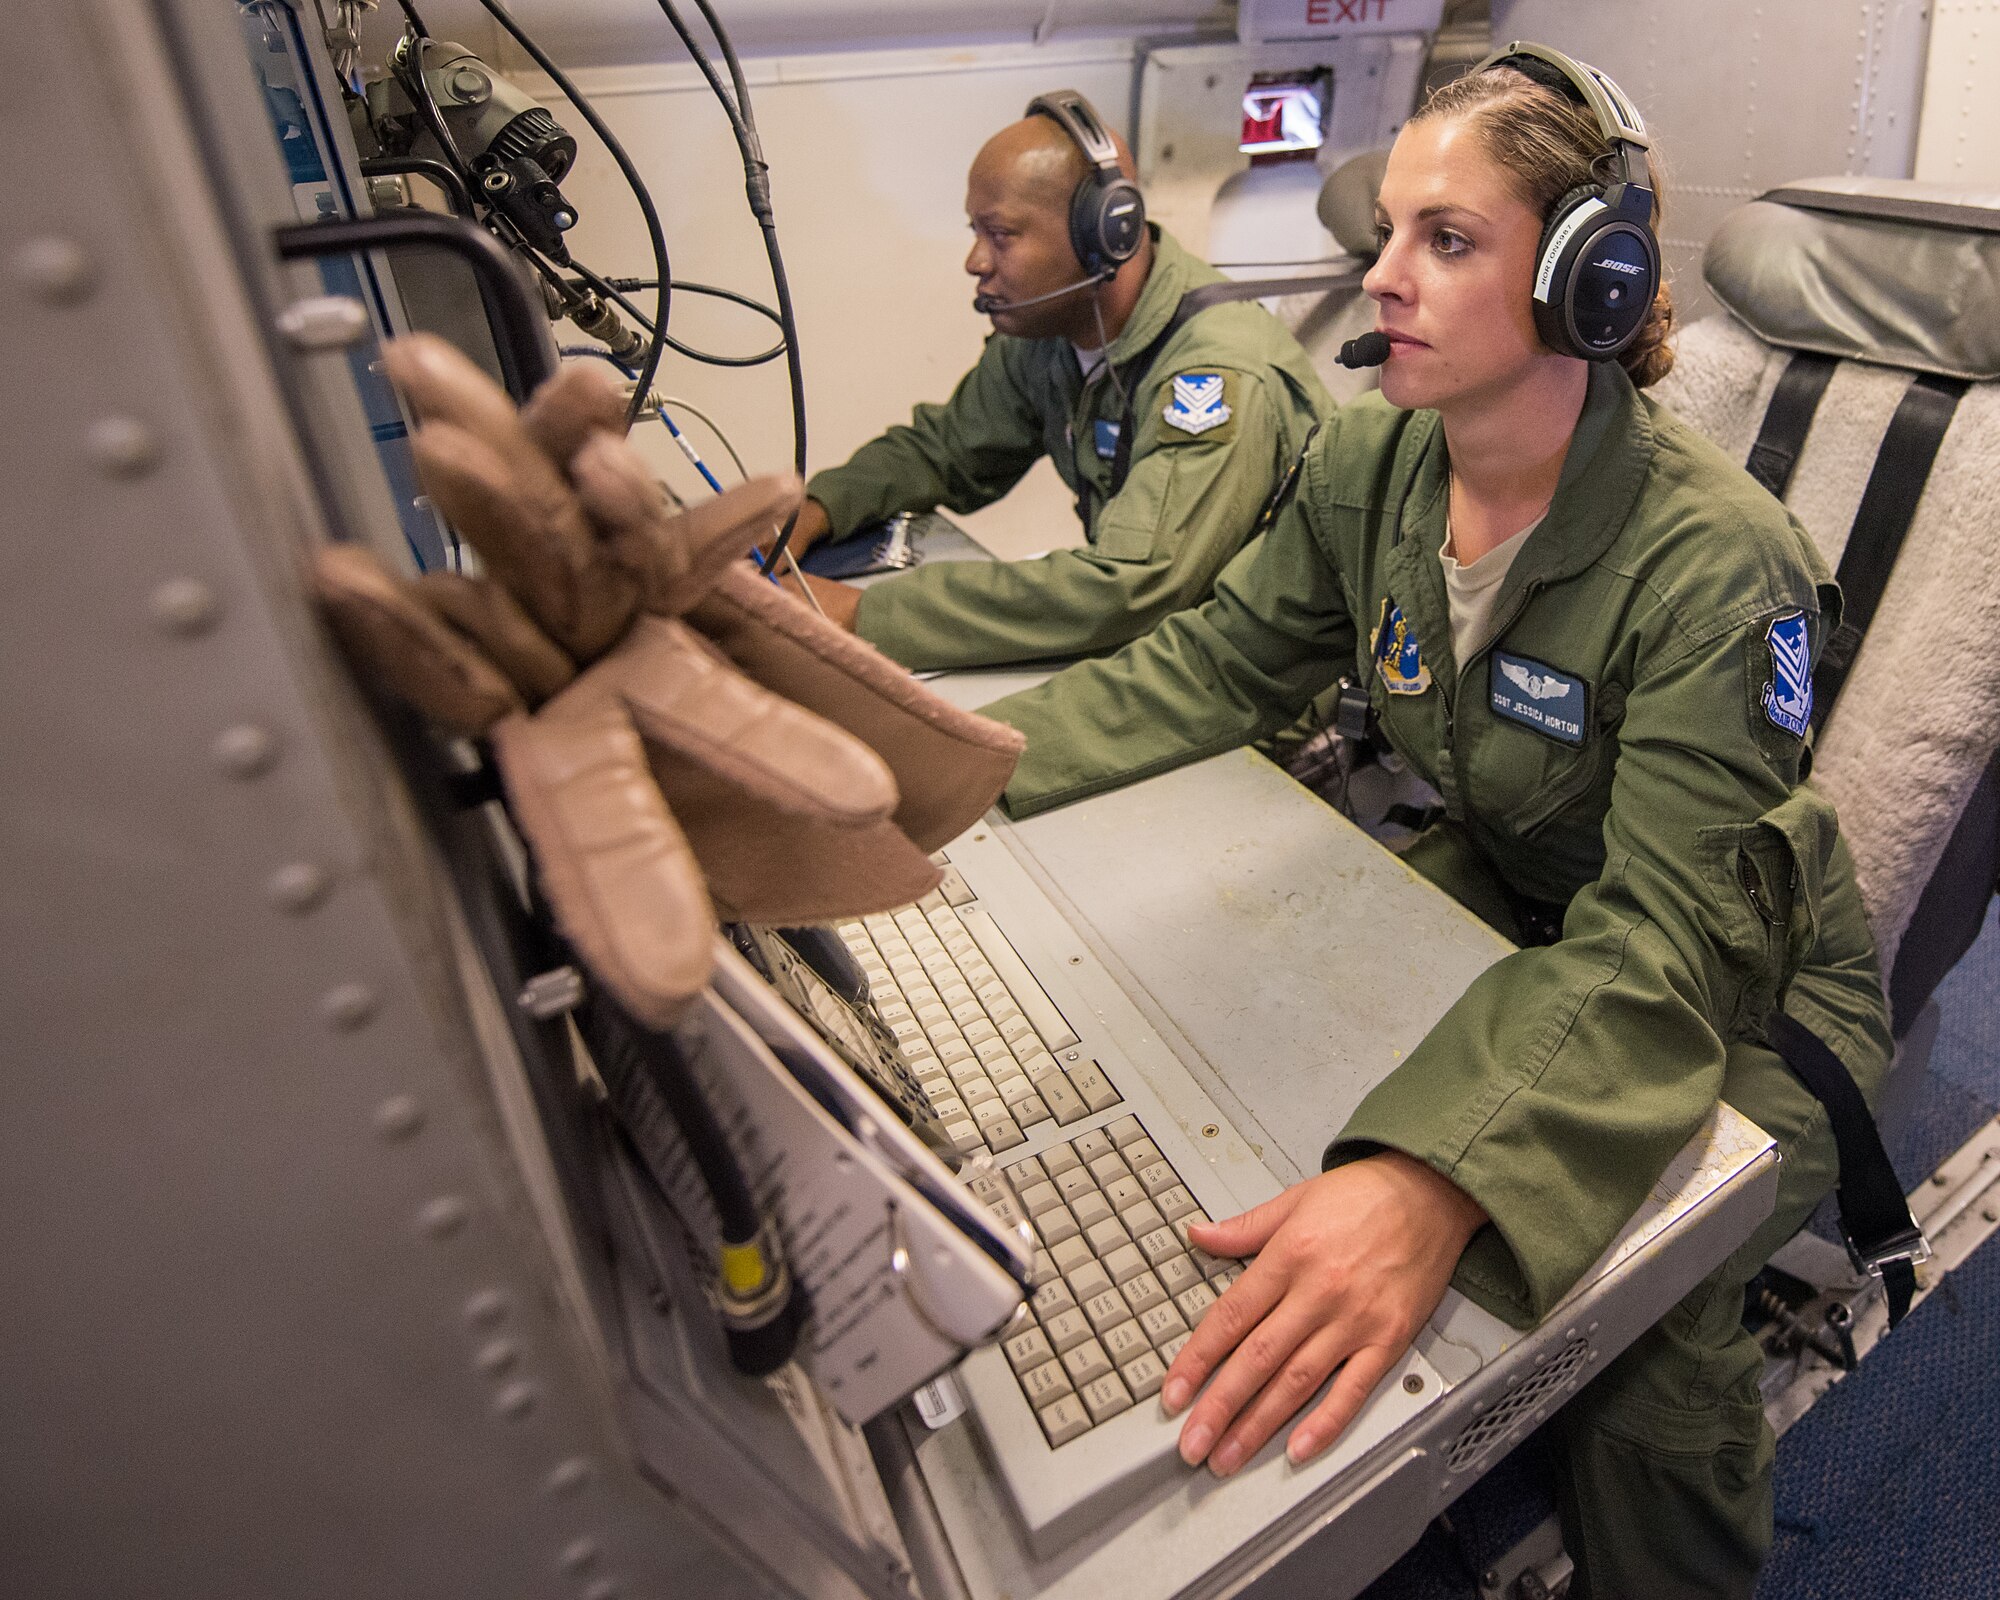 U.S. Air Force Staff Sgt. Jessica Horton, right, and Master Sgt. Ken Menefee, communication systems technicians with the 116th Air Control Wing (ACW), Georgia Air National Guard, monitor tracking data from their operator work station aboard an E-8C Joint STARS during a mission in the Boars Nest 2015 exercise, Robins Air Force Base, Ga., Aug. 20, 2015. The 116th ACW hosted the eight annual Boars Nest Large Force Exercise bringing together more than 20 joint-force units and 55 different aircraft for aircrew training in a realistic land and maritime threat environment. Crews flying the E-8C Joint STARS manned platform, used their unique battle management, command and control, intelligence, surveillance and reconnaissance capabilities, integrated with other Air National Guard, Air Force, Navy, and Marine aircraft, to complete maritime and land-based missions during the exercise. (U.S. Air National Guard photo by Senior Master Sgt. Roger Parsons/Released)